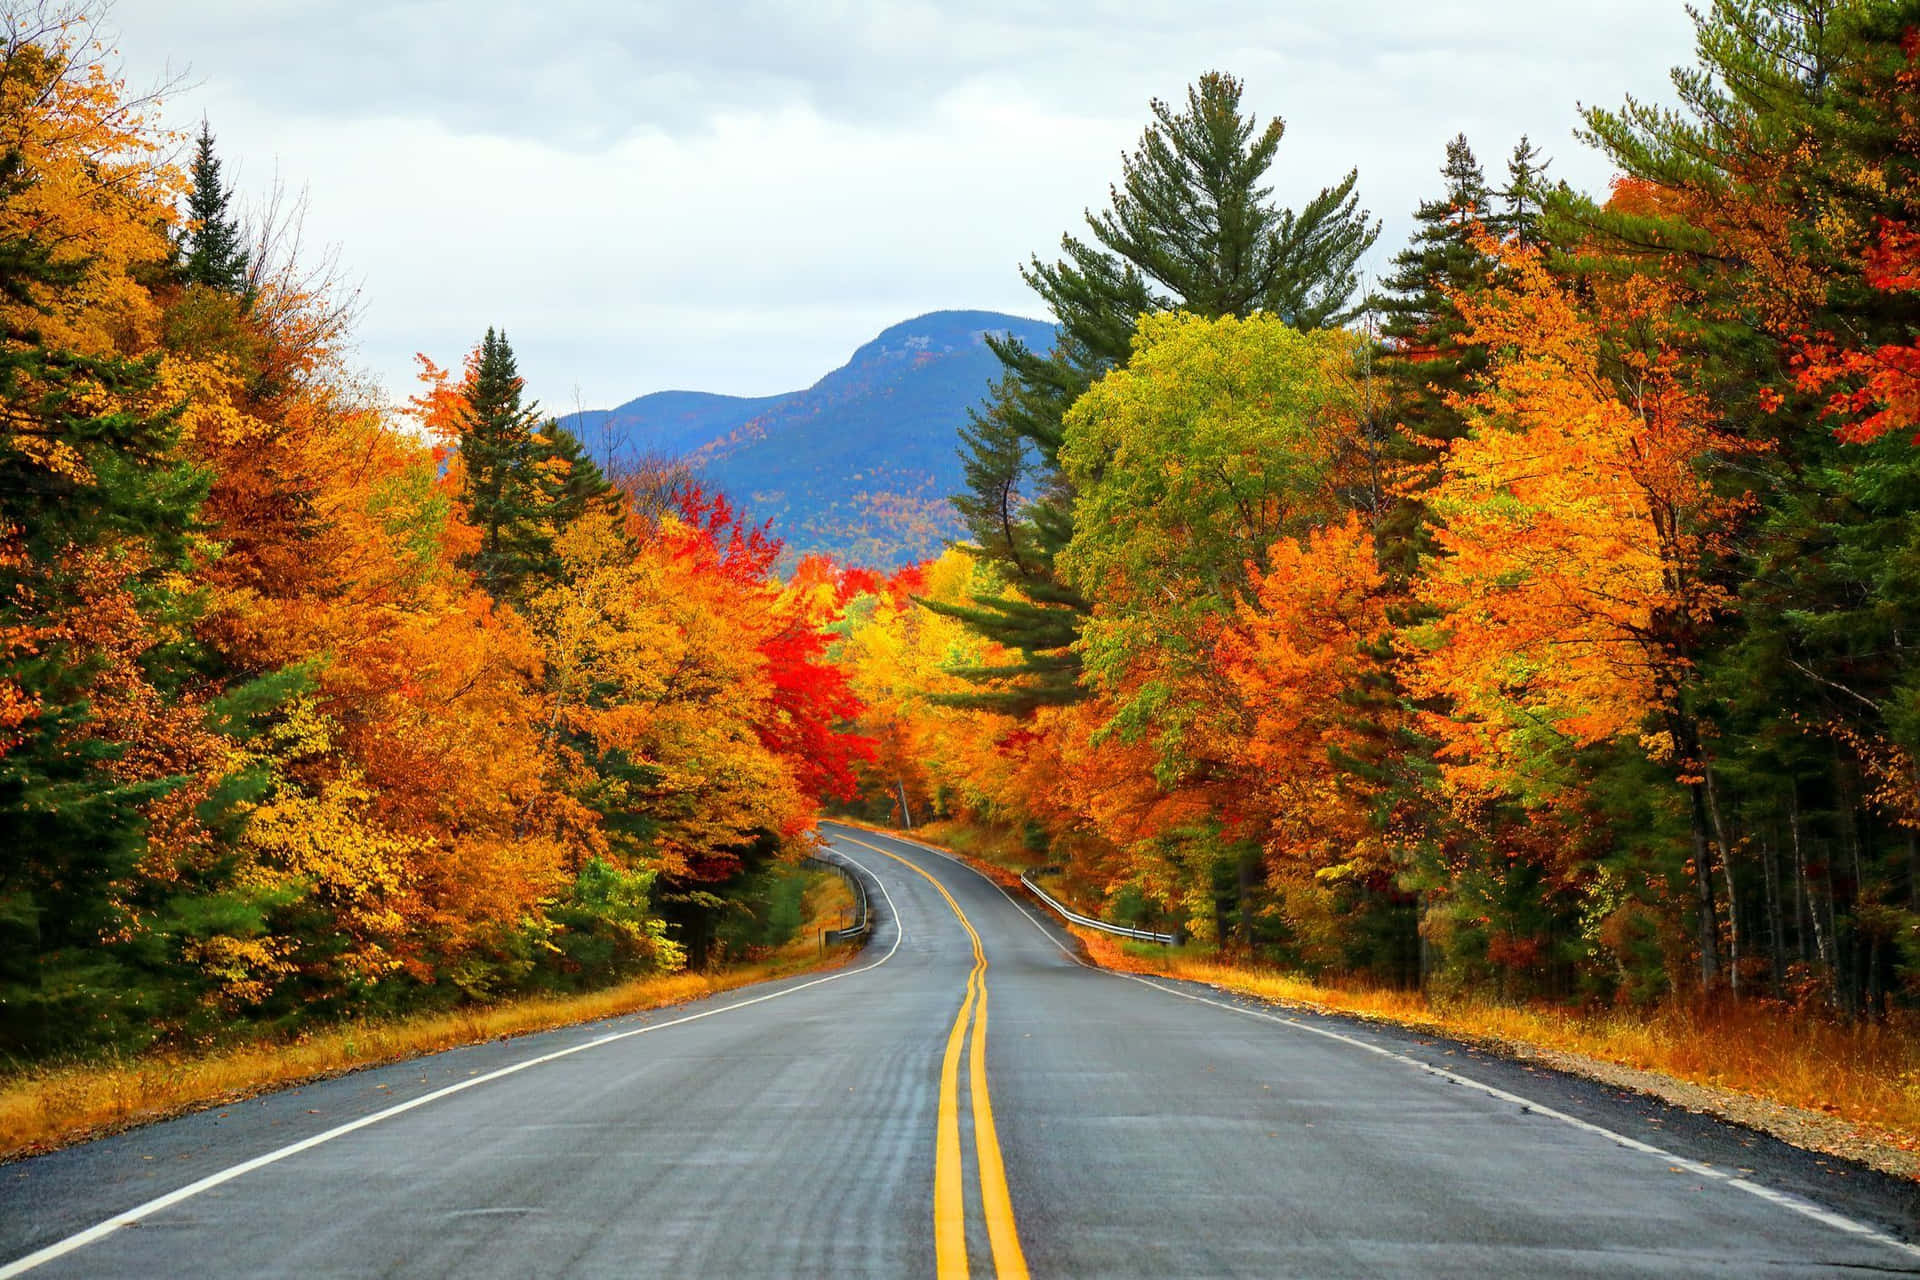 Take a breather in the beauty of nature this fall